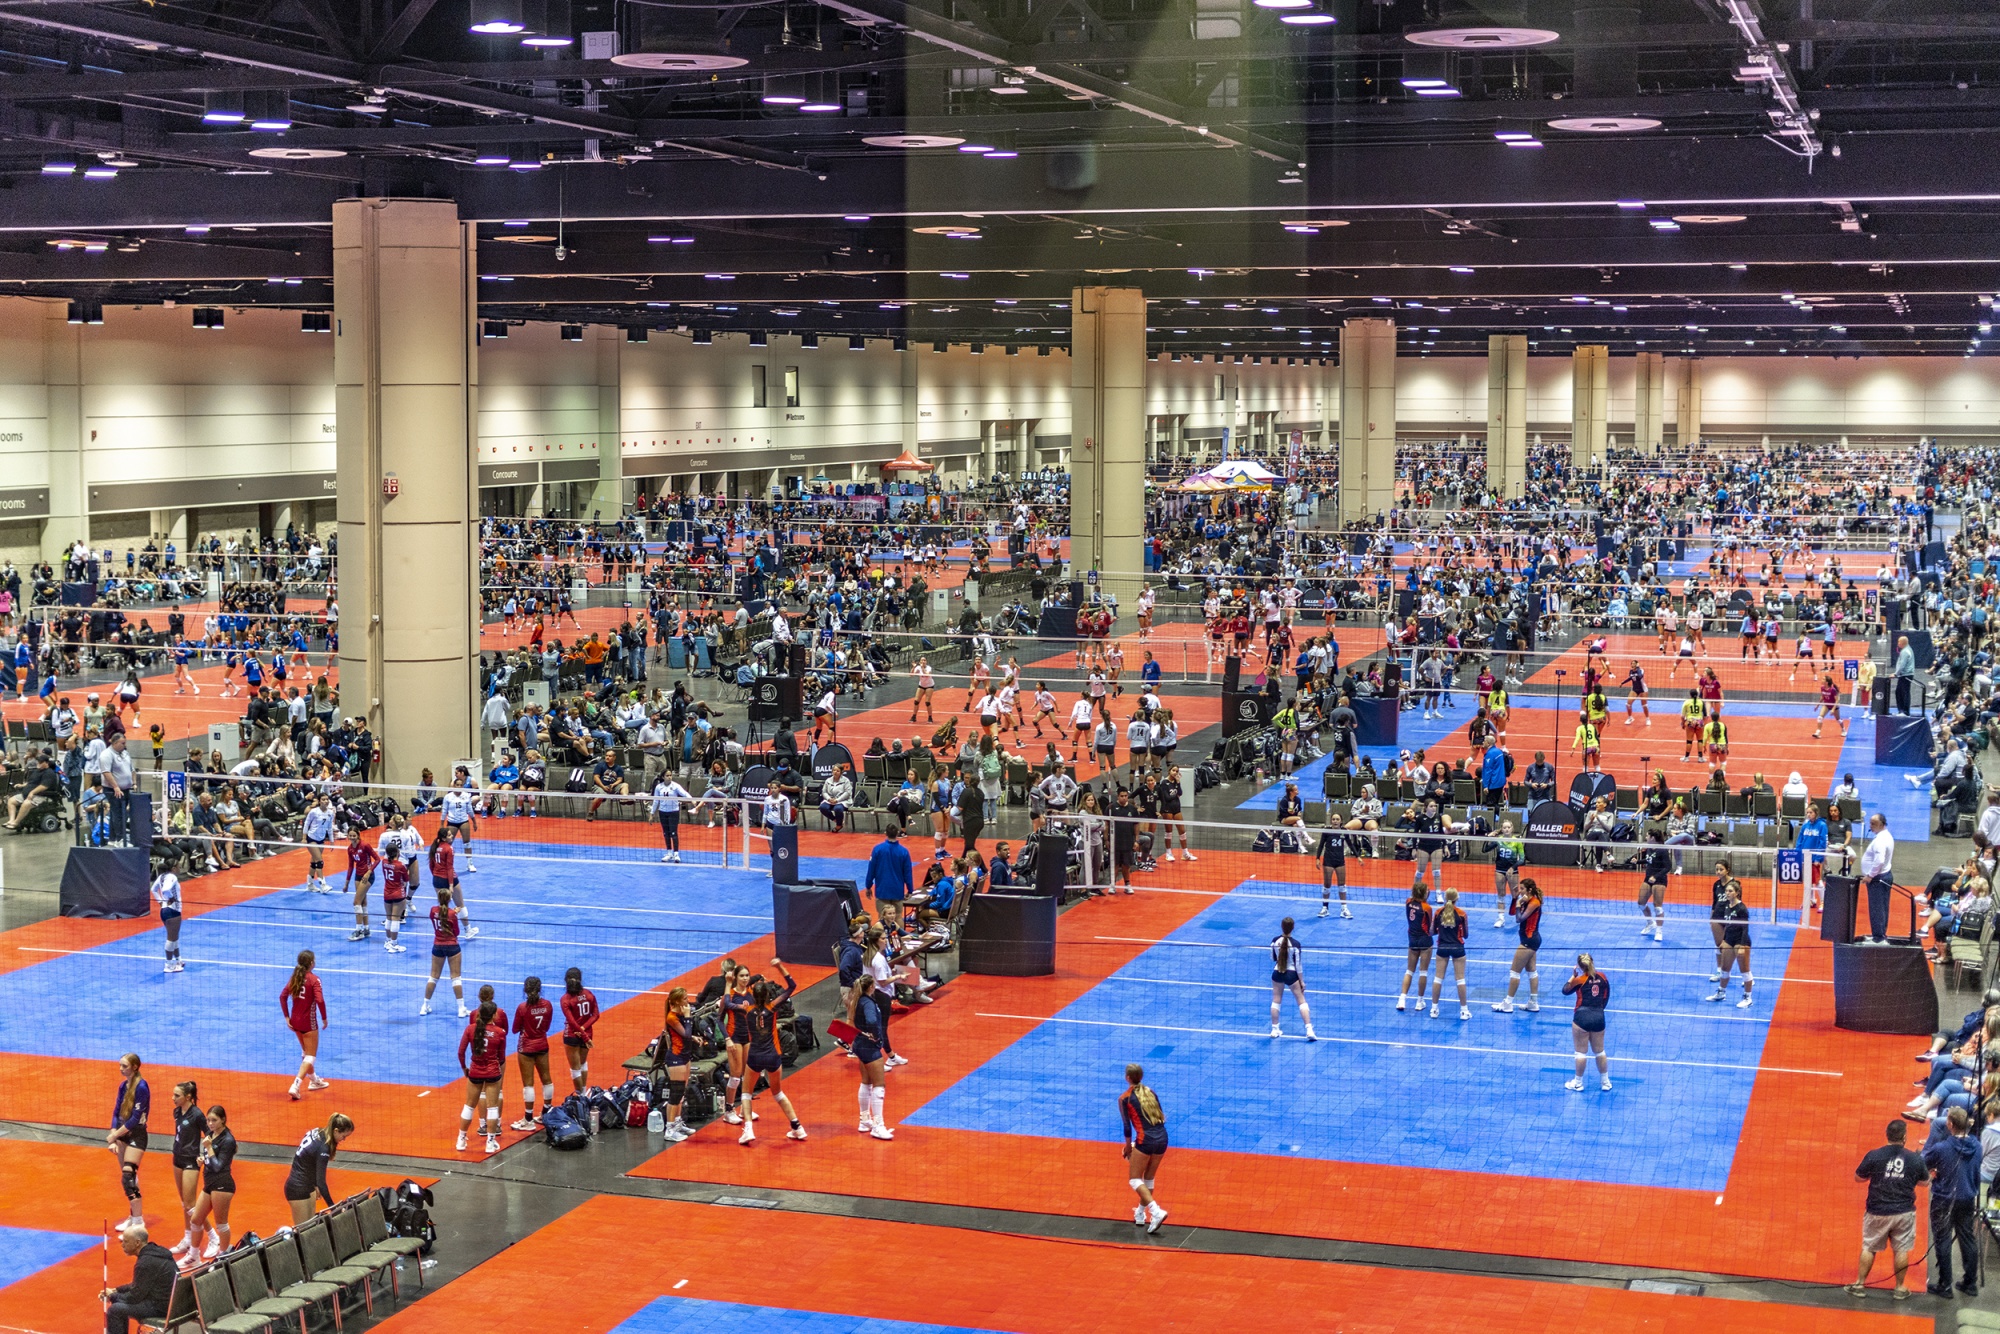 Kids Volleyball Games Are Key Driver of Convention Recovery